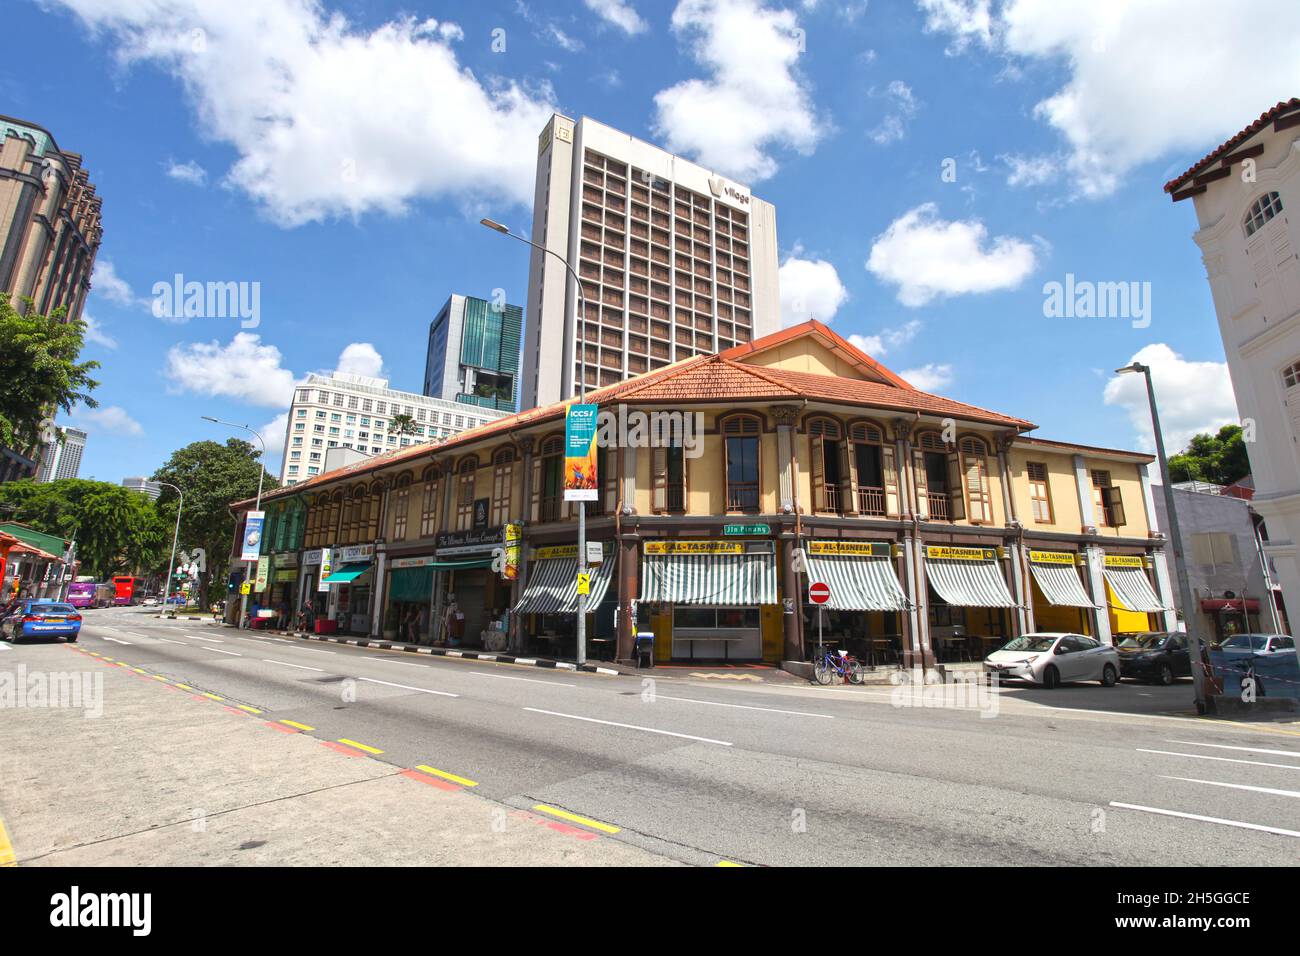 Old shophouses on North Bridge Road opposite the Sultan mosque with restaurants selling Indian Muslim food and modern buildings in the background. Stock Photo